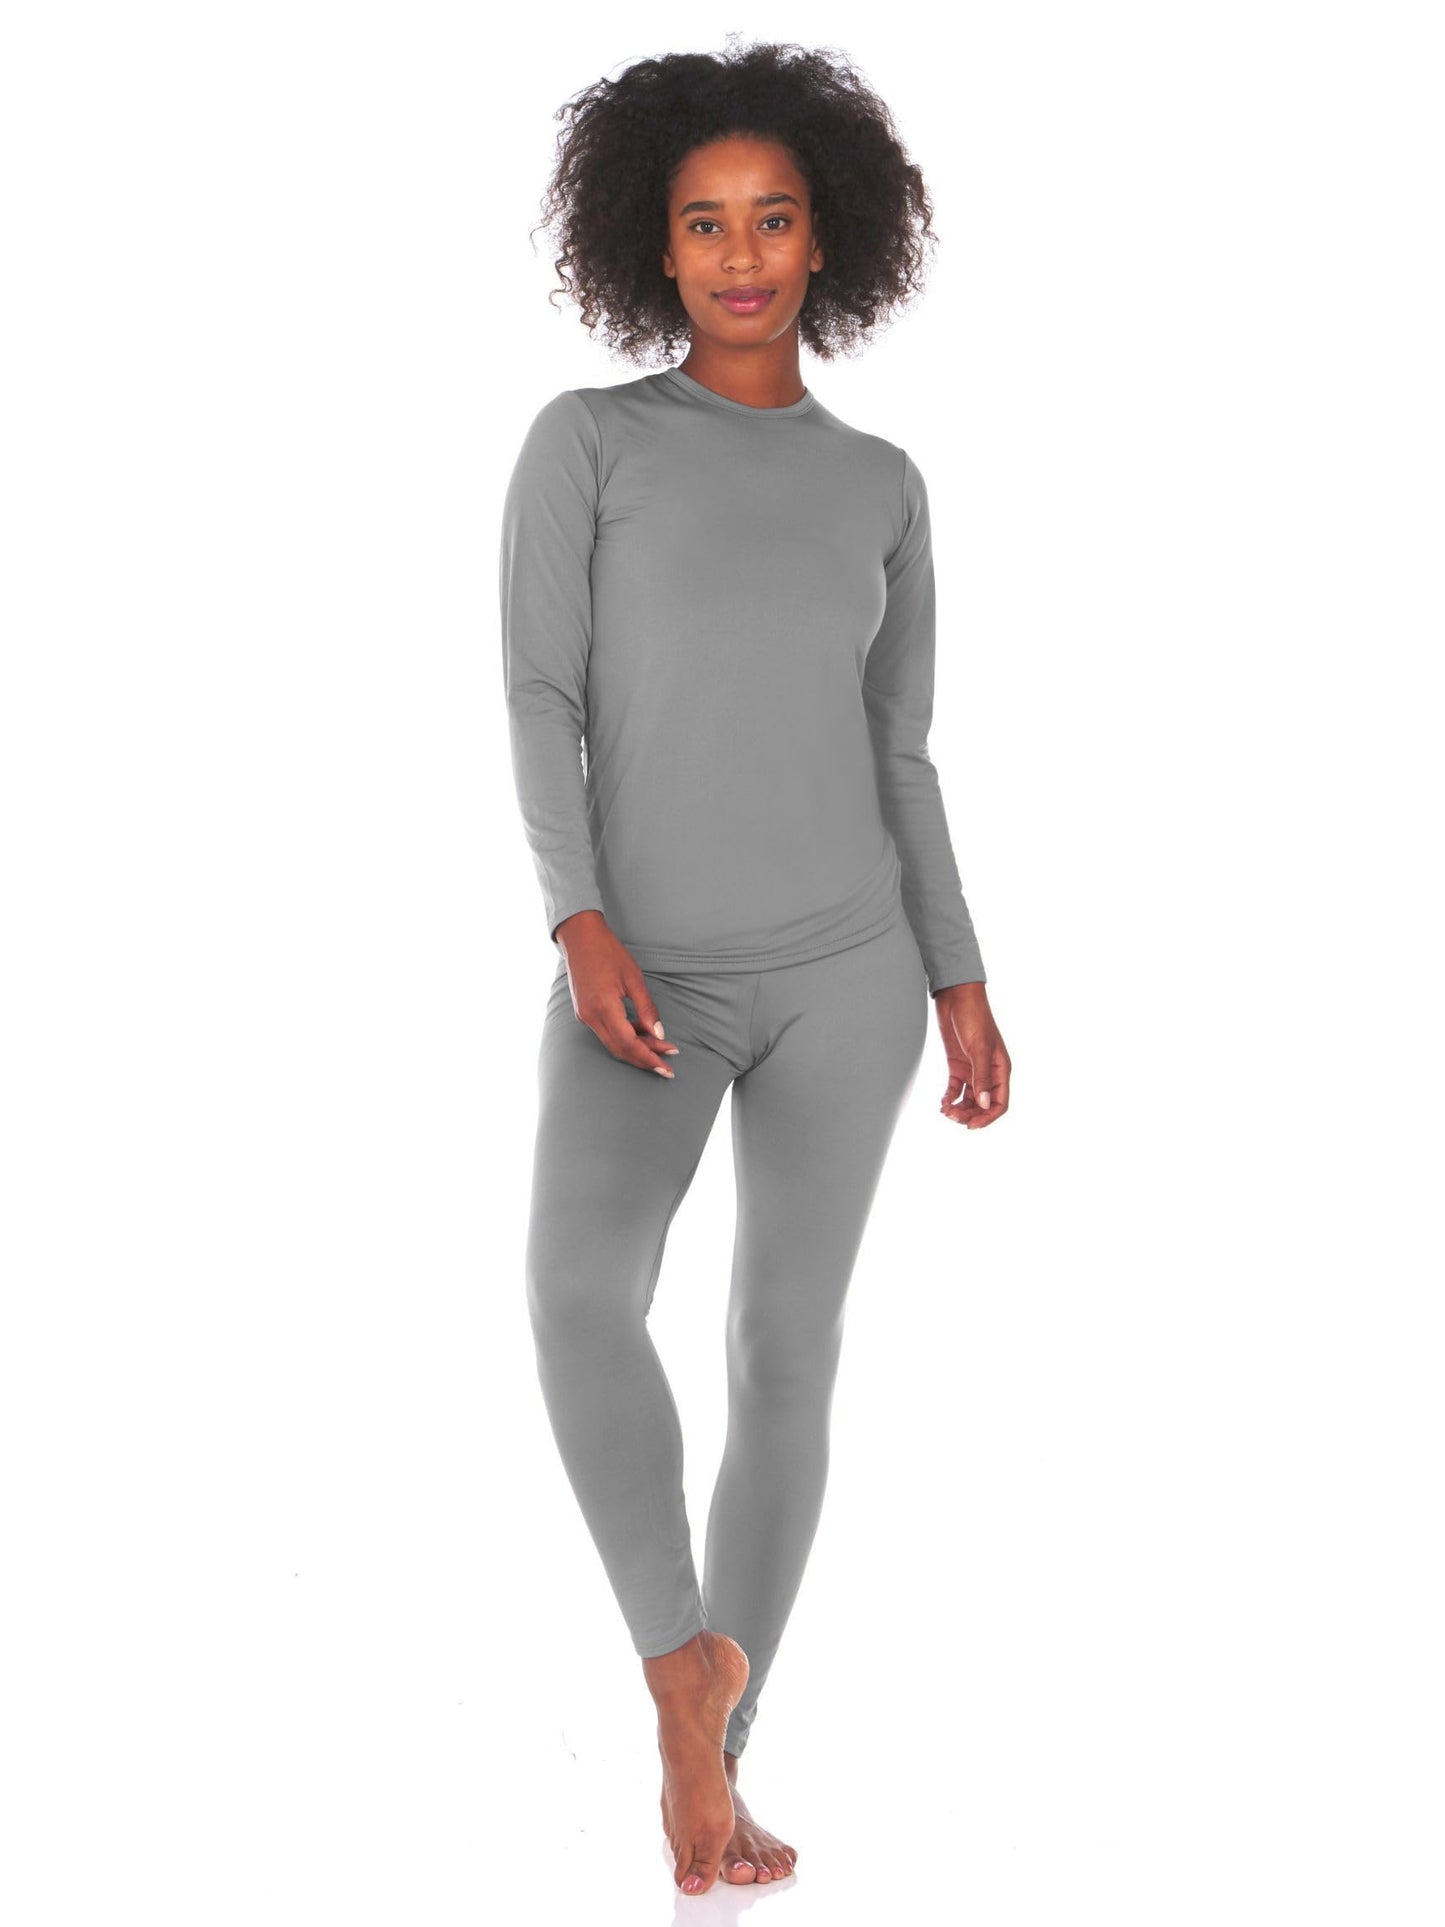 Thermajane Long Johns Thermal Underwear for Women Fleece Lined Base Layer Pajama Set Cold Weather (XX-Small, Grey)